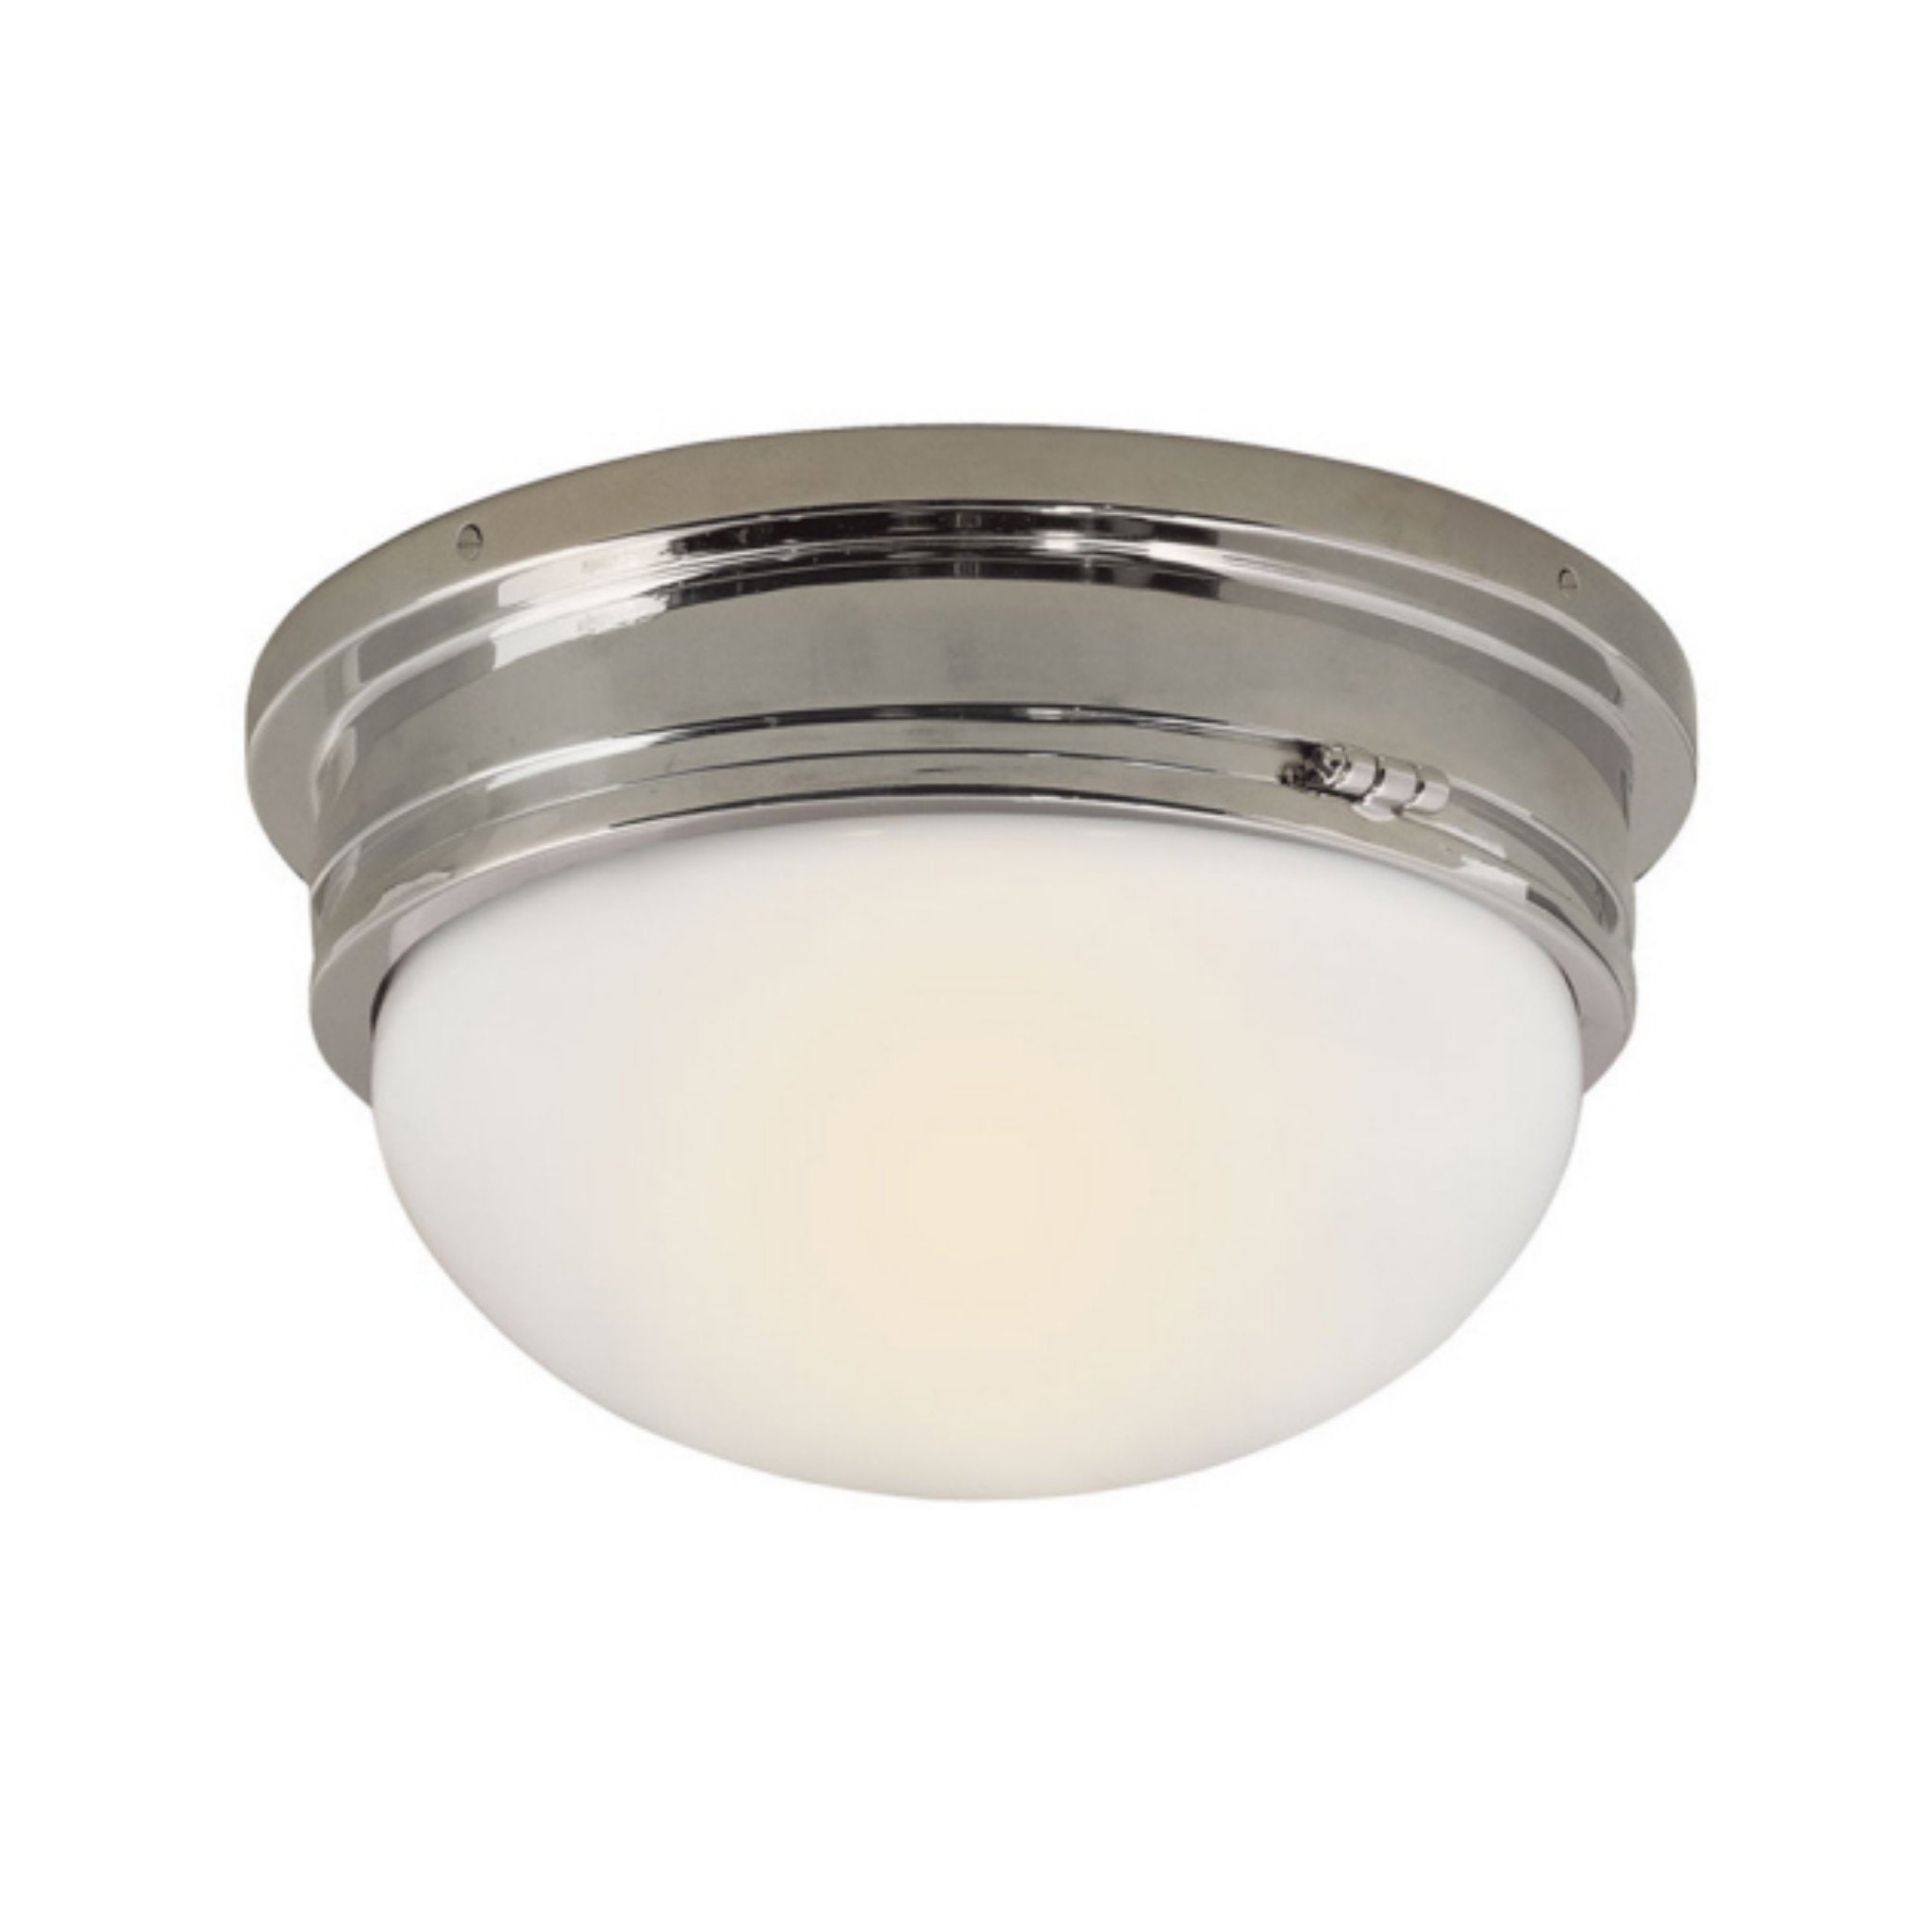 Chapman & Myers Marine Large Flush Mount in Polished Nickel with White Glass